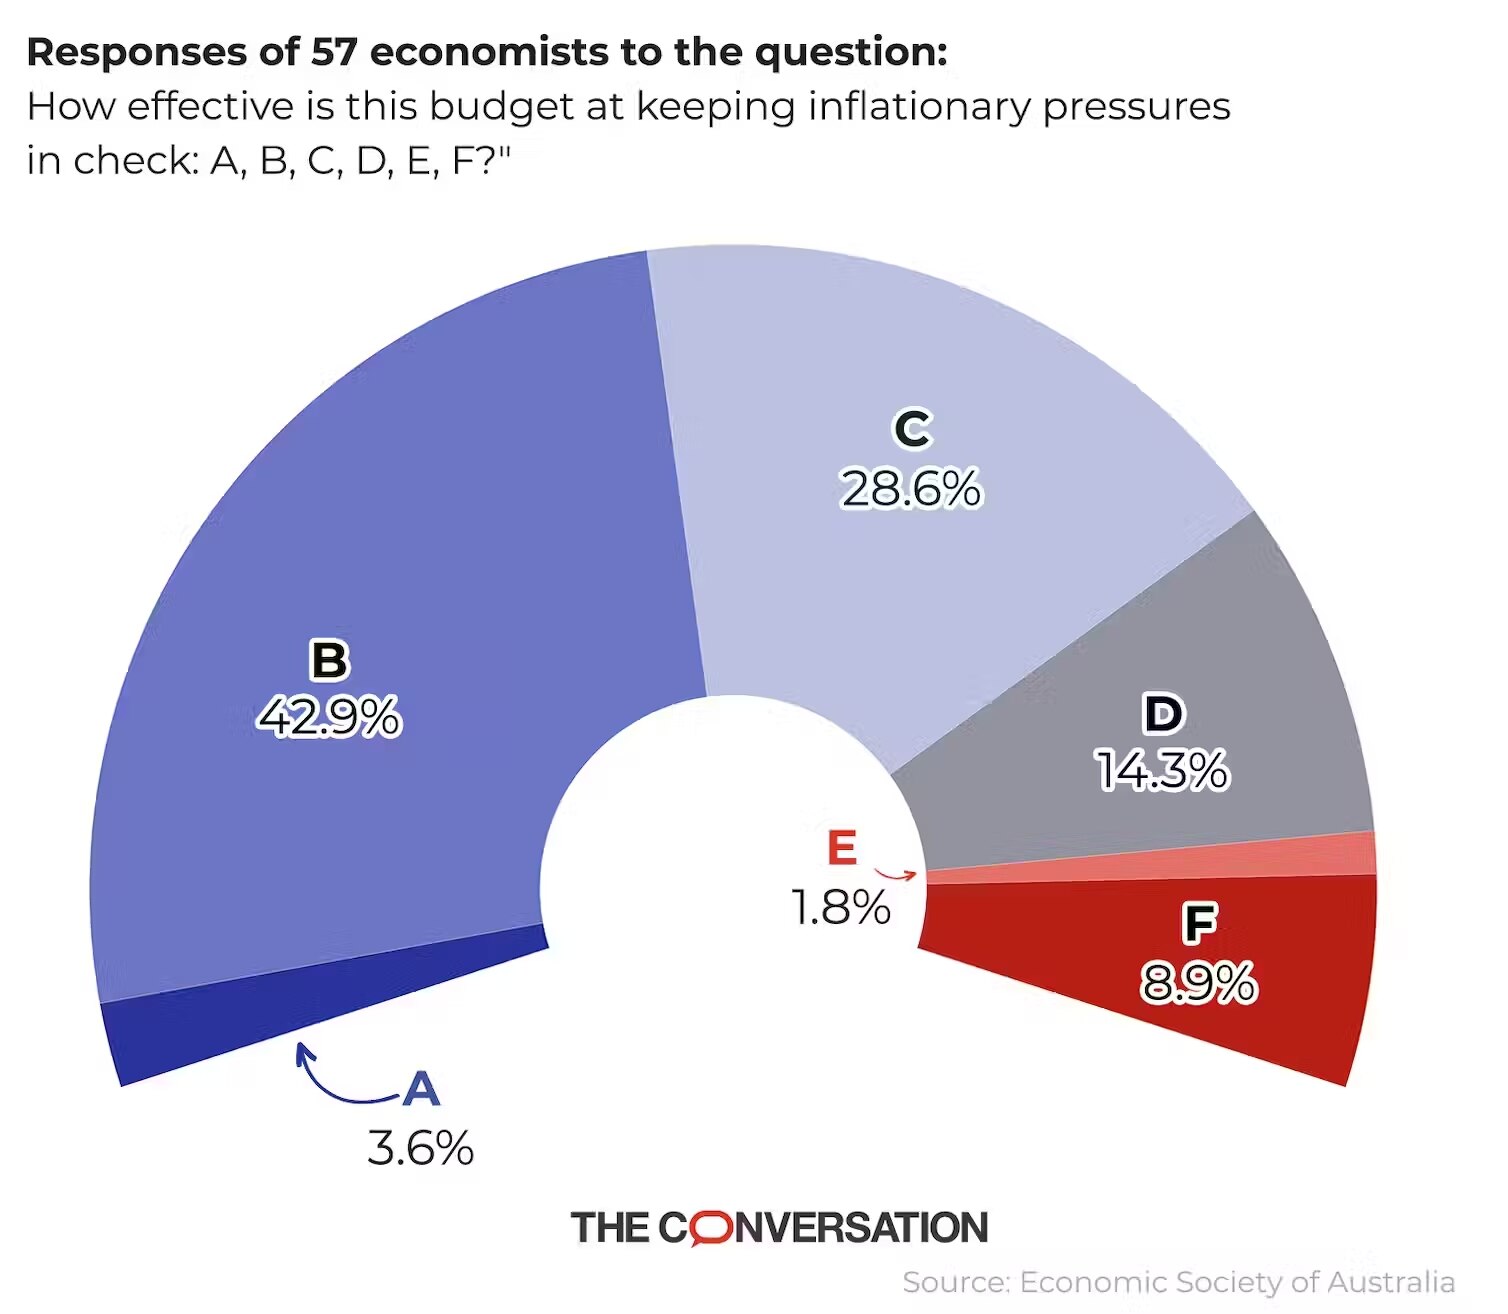 A chart shows the proportion of 57 economists who scored the budget's effectiveness in keeping inflationary pressures in check